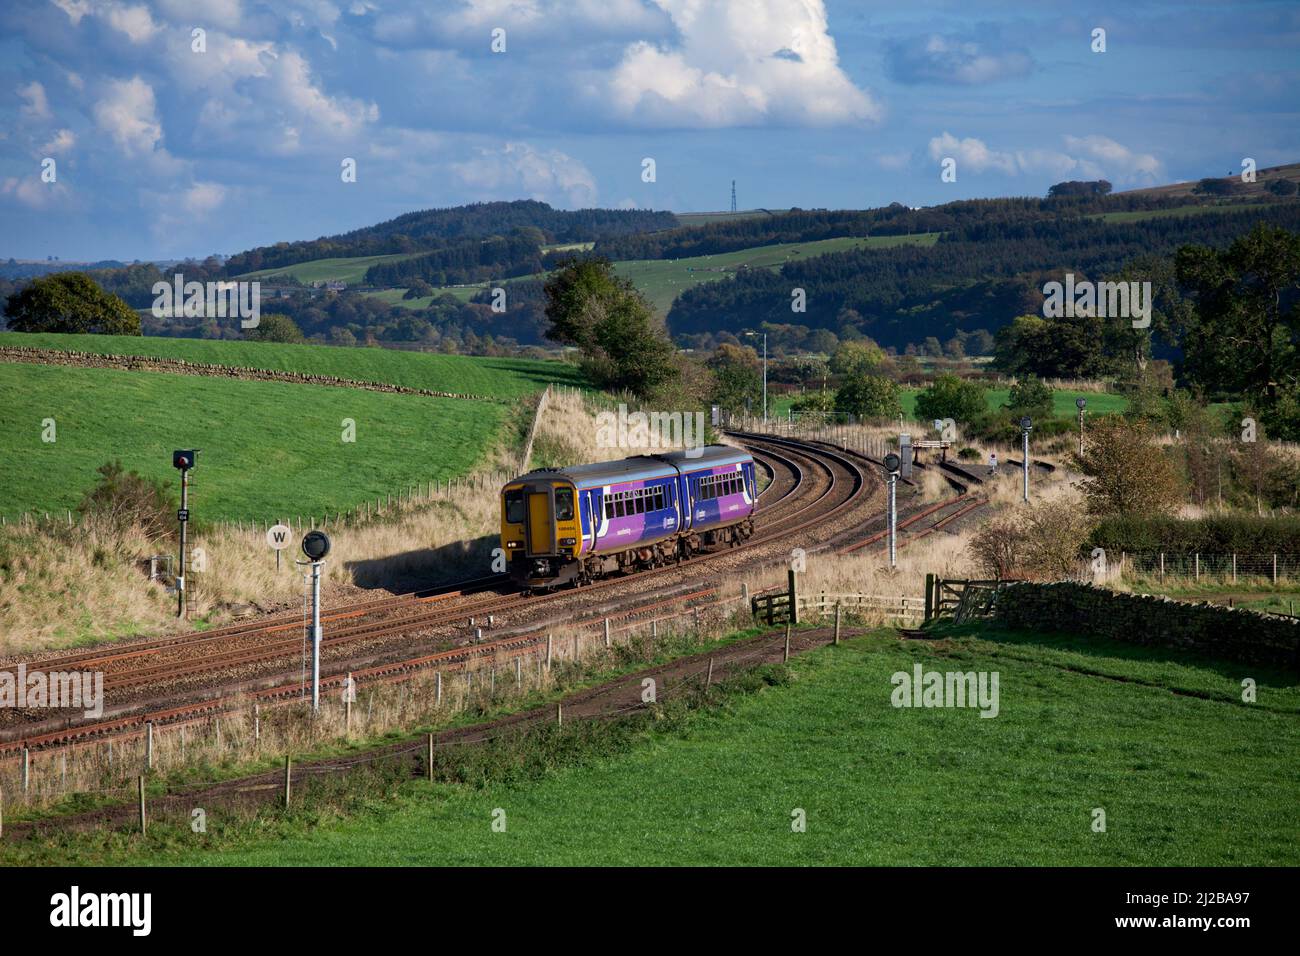 Northern rail class 156 sprinter train passing Whitchester on the scenic Tyne valley railway line Stock Photo